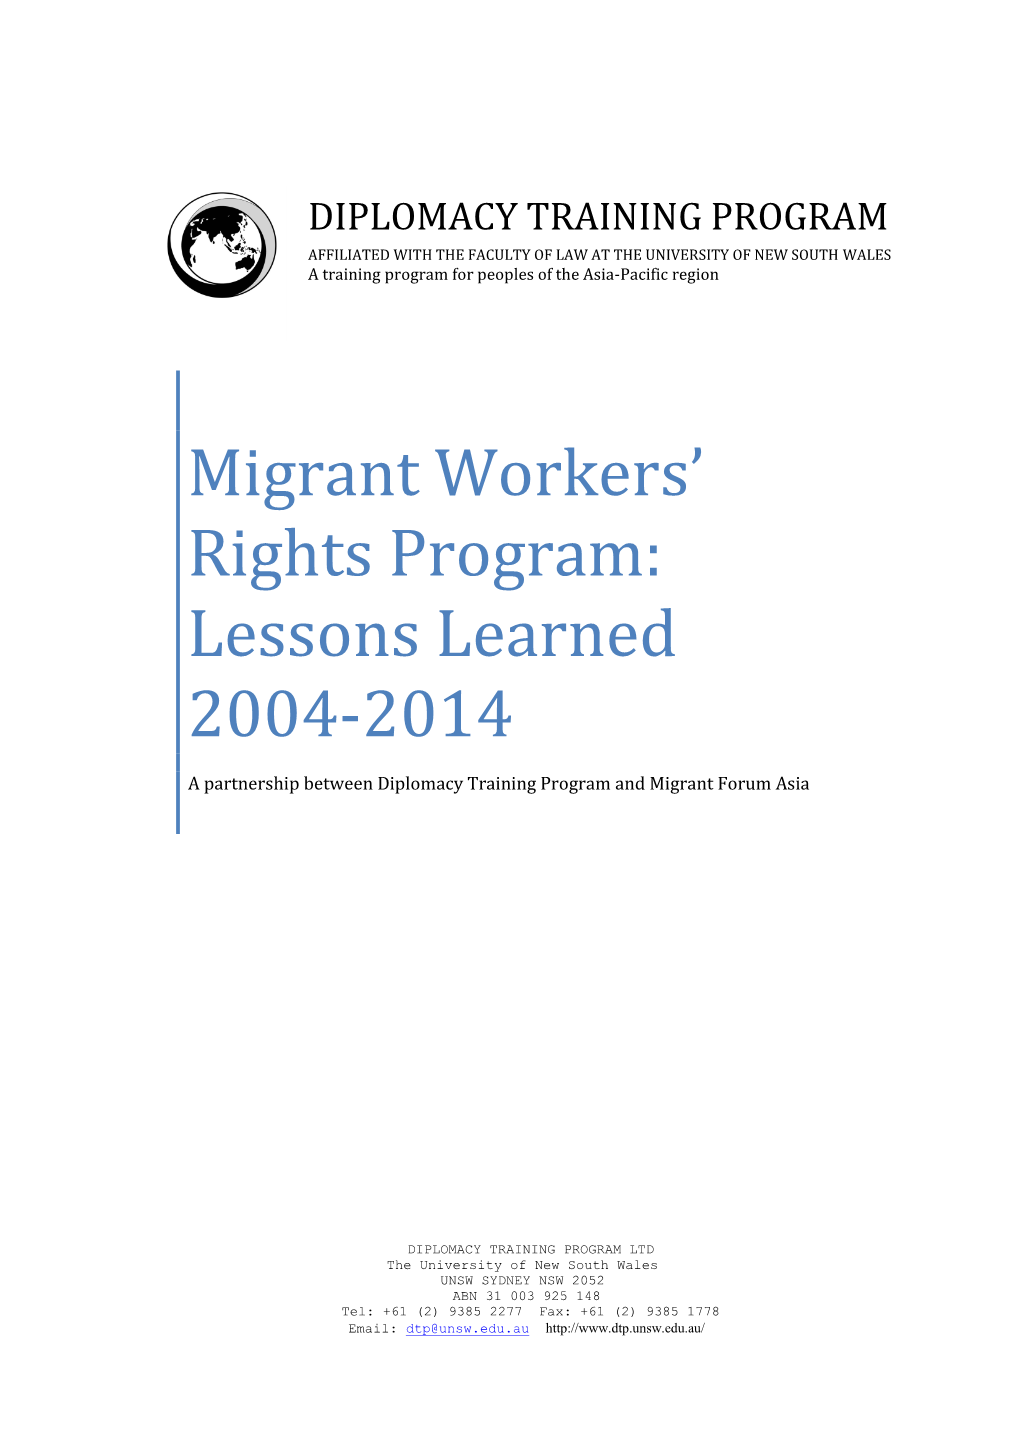 Migrant Workers' Rights Program: Lessons Learned 2004-2014